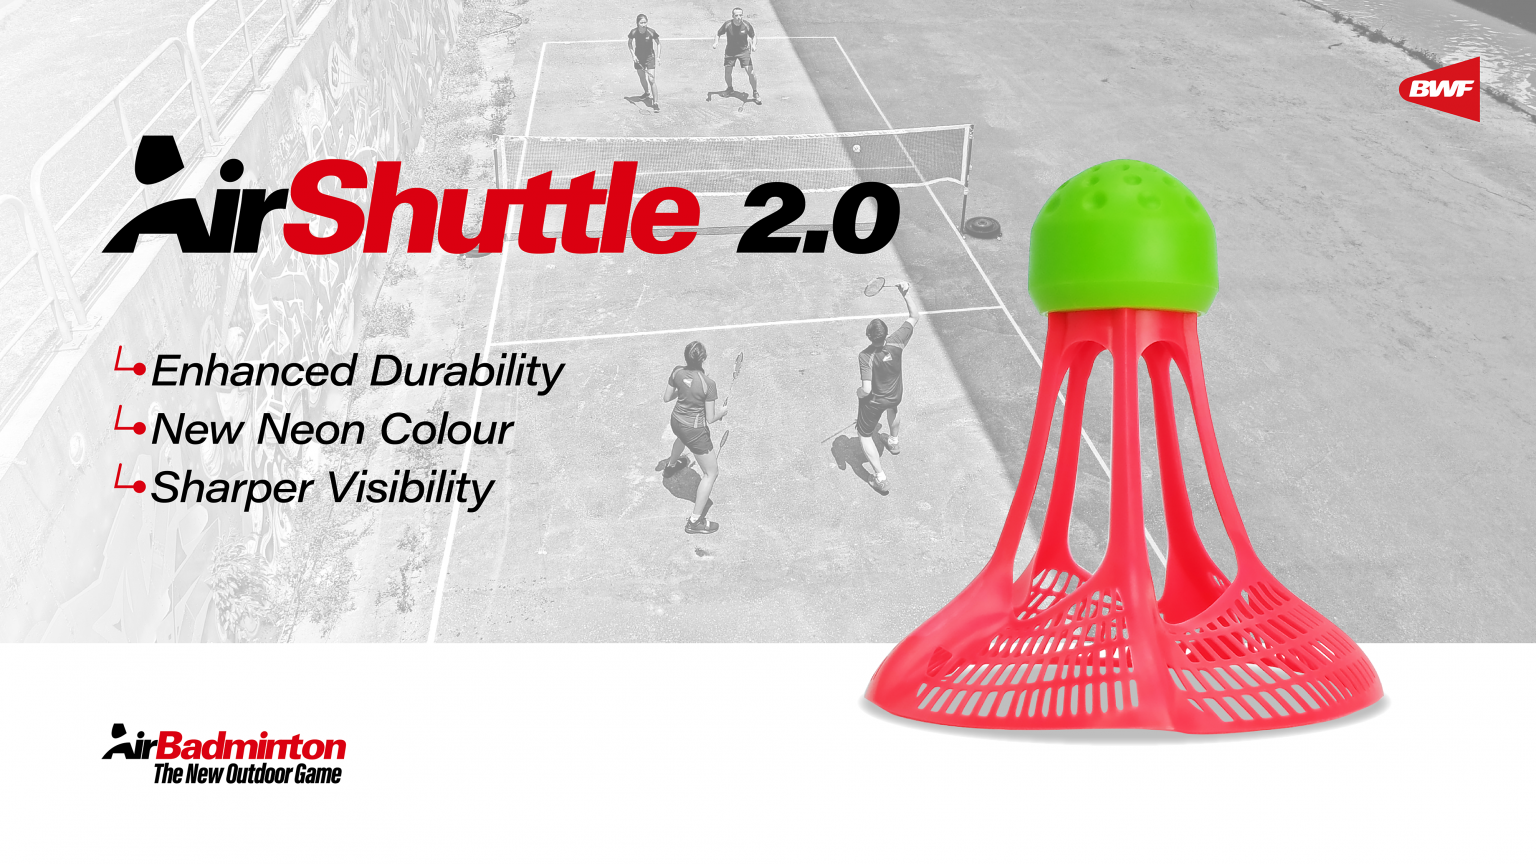 BWF launches new shuttlecock for AirBadminton discipline